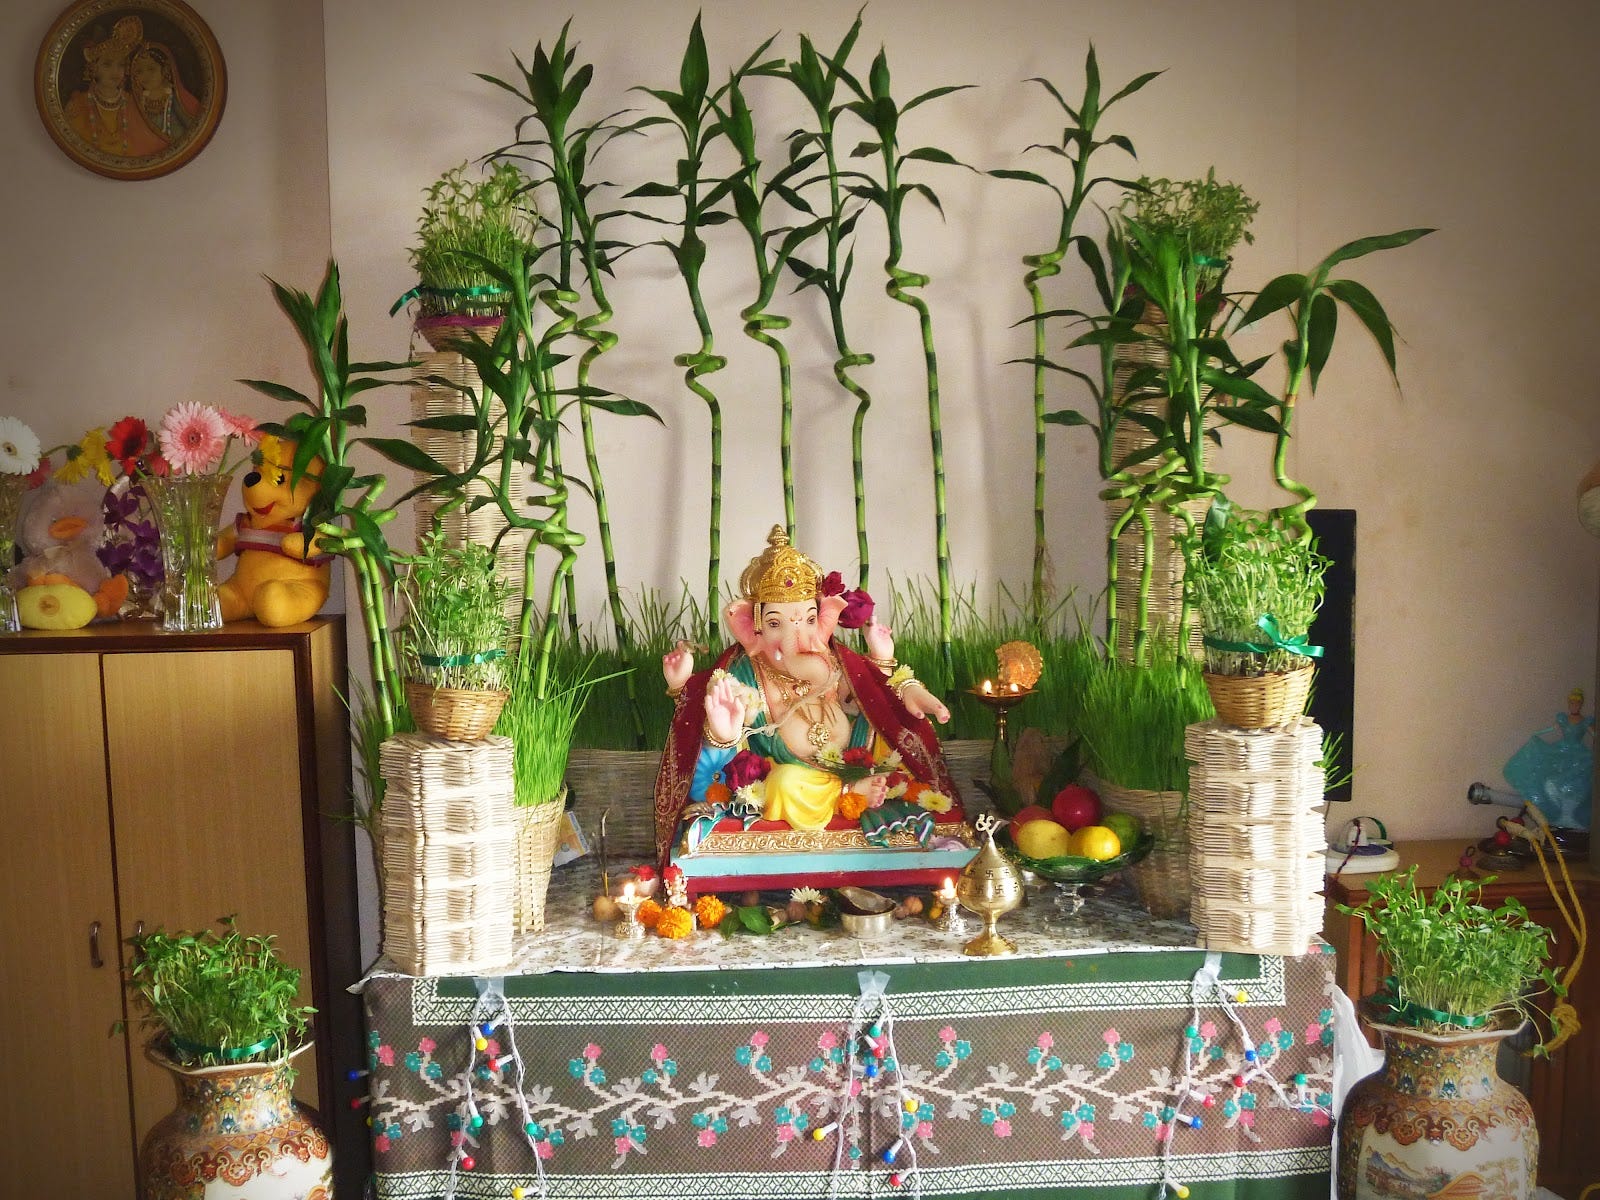 Ganpati Decoration Ideas At Home With Flowers Plants